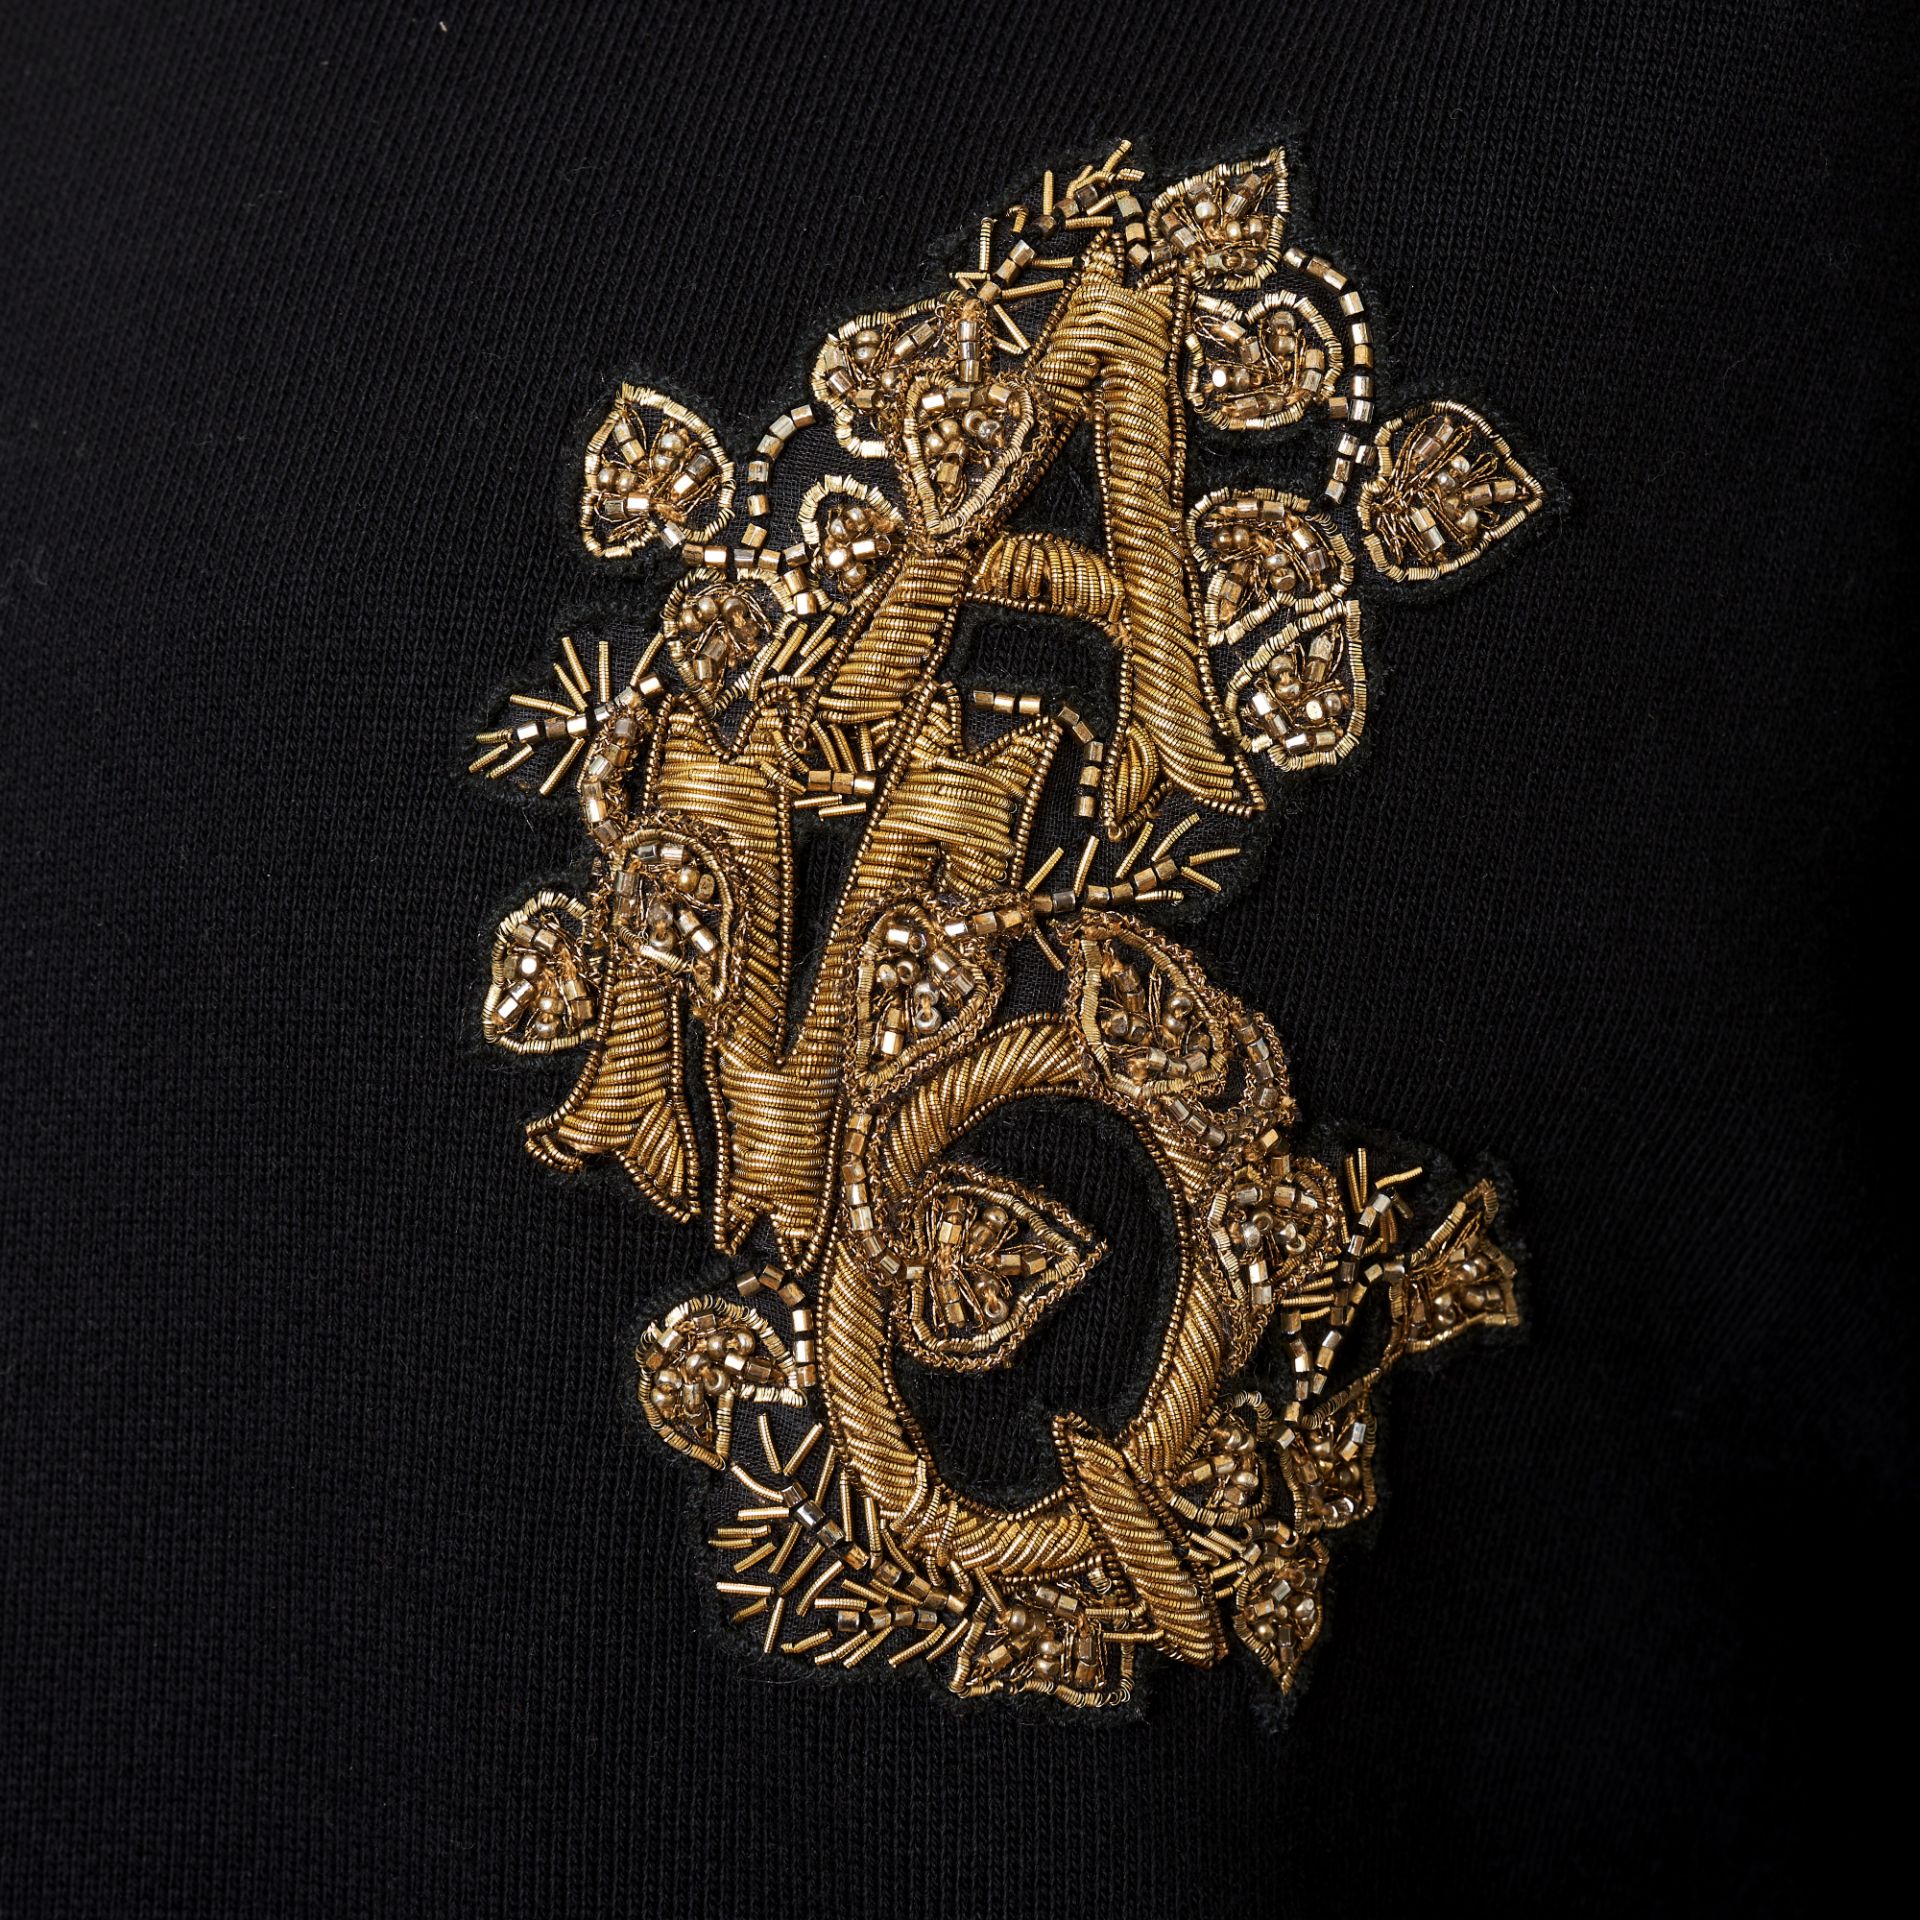 NO RESERVE ALEXANDER MCQUEEN BLACK AMQ EMBROIDERED JERSEY - Image 2 of 2